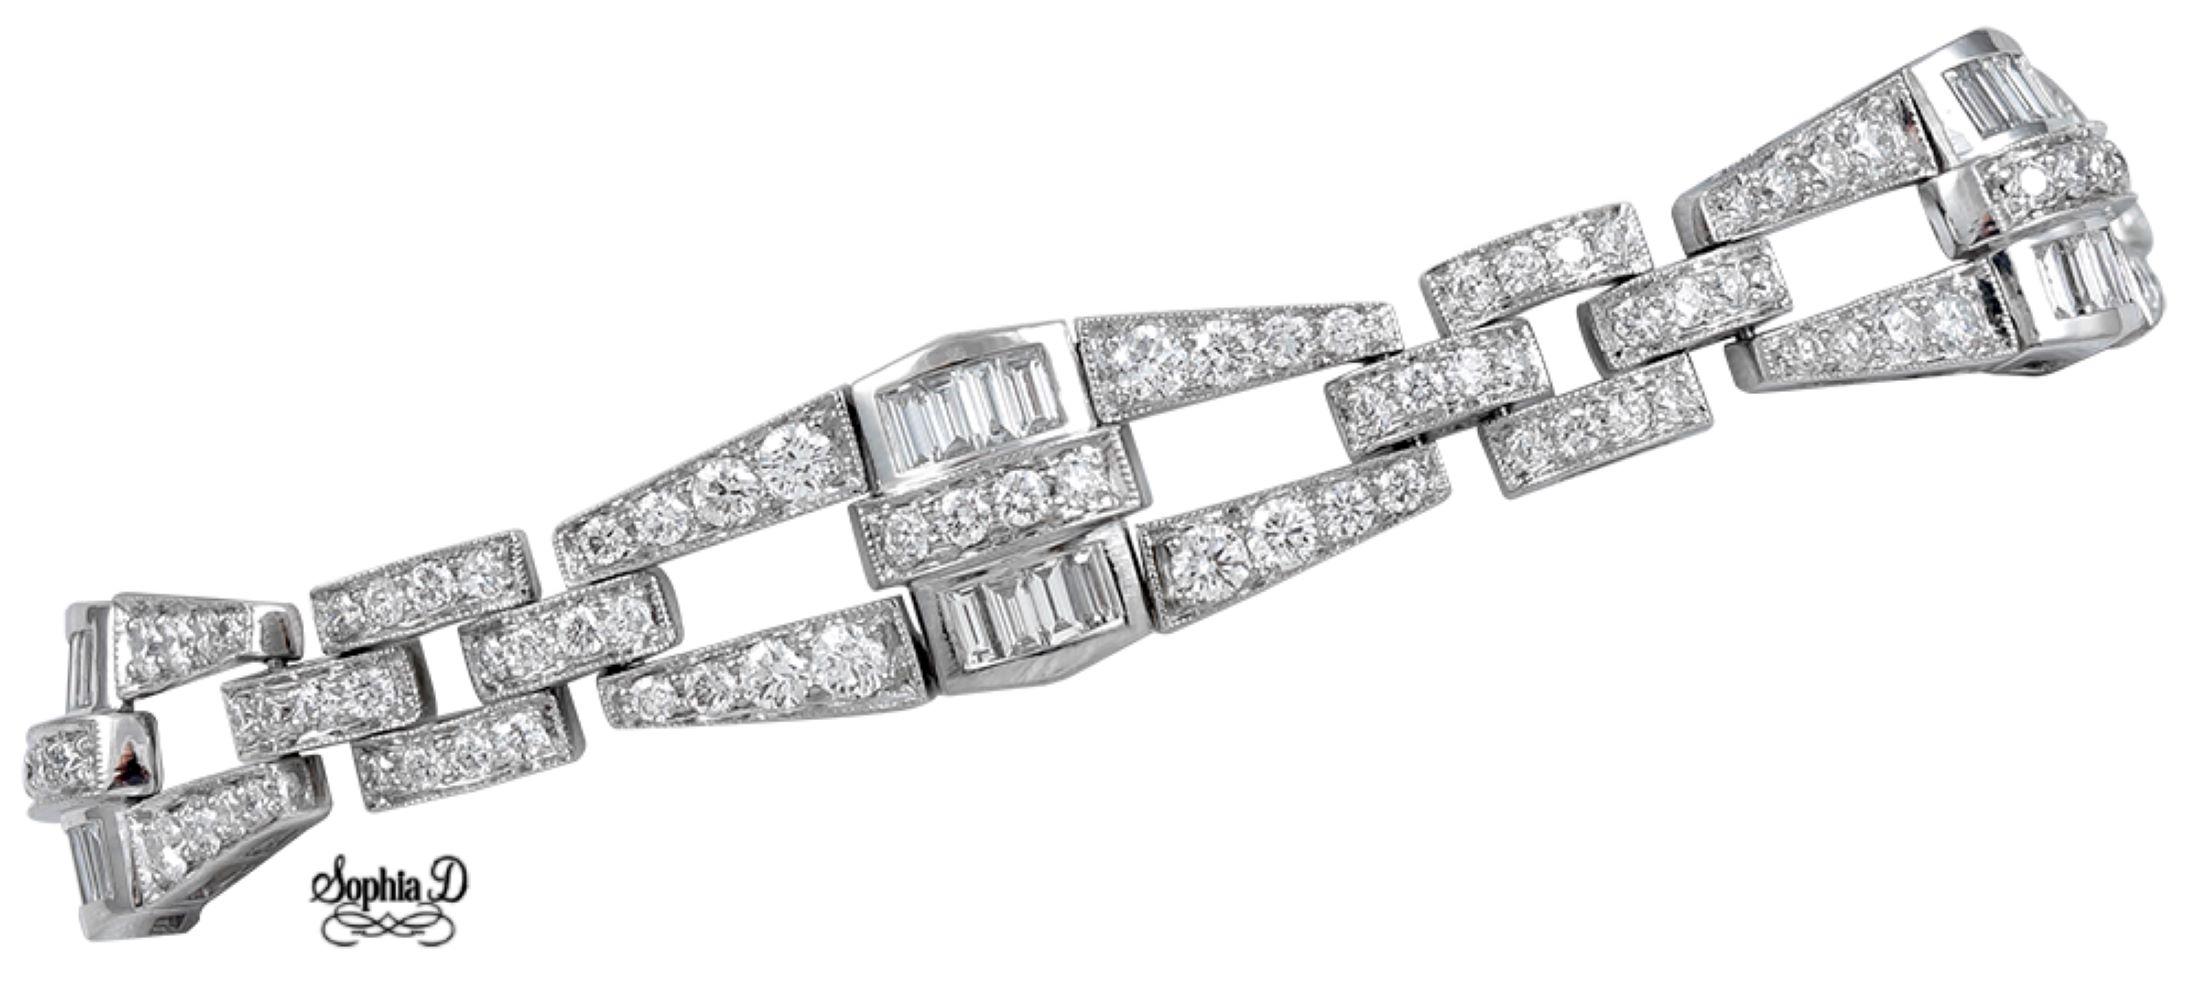 An Art Deco inspired platinum bracelet by Sophia D with 6.18 carats of diamond.

Sophia D by Joseph Dardashti LTD has been known worldwide for 35 years and are inspired by classic Art Deco design that merges with modern manufacturing techniques. 